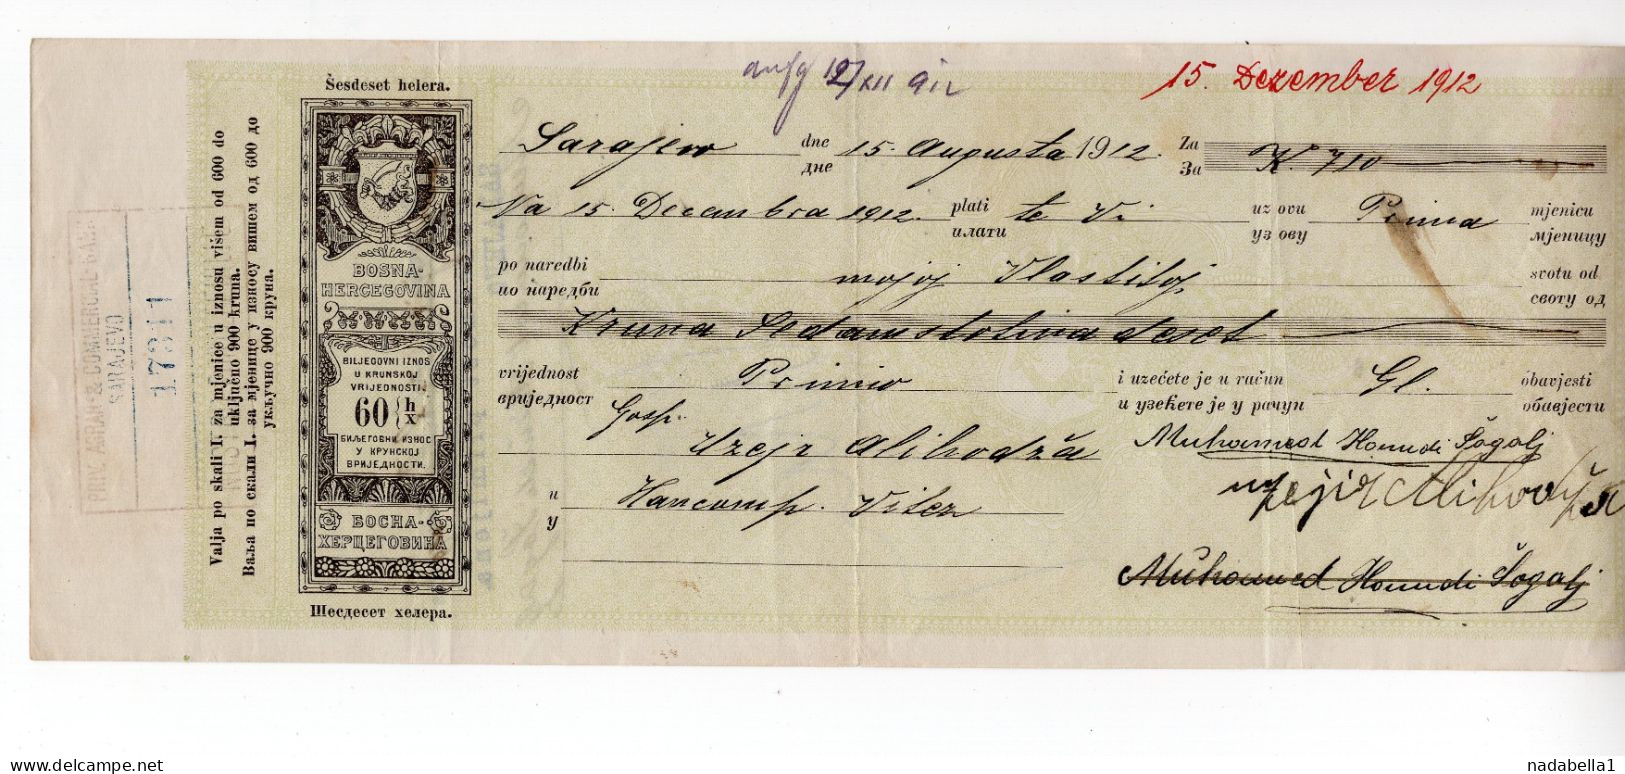 1912. BOSNIA,AUSTRIAN OCCUPATION,SARAJEVO,PRIV. AGRAR & COMMERCIAL BANK OF BIH,60 HELLER CHEQUE - Cheques En Traveller's Cheques